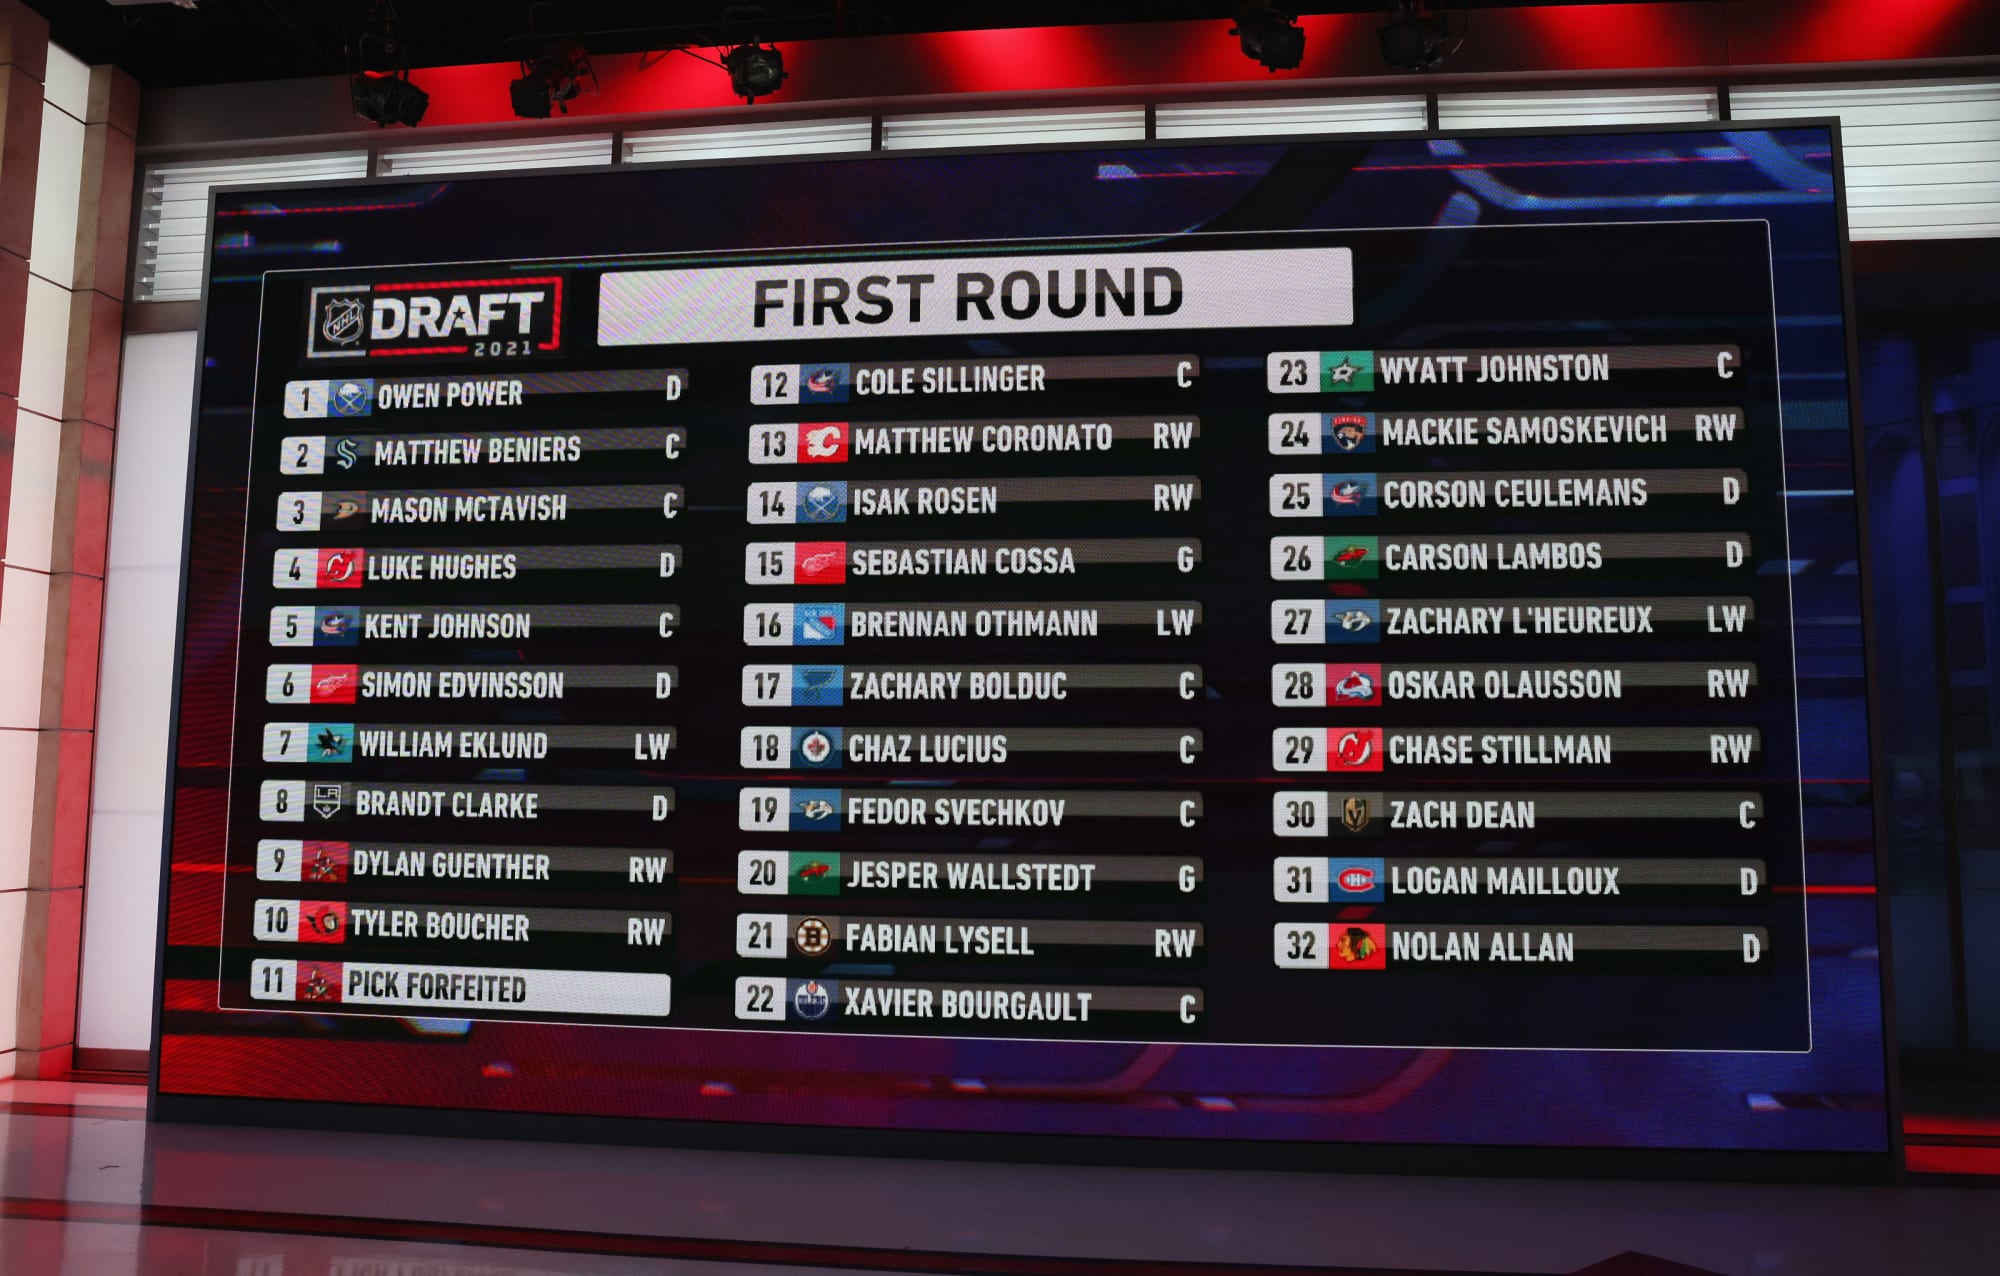 2022 NHL Draft: Complete Draft Order For The First Round